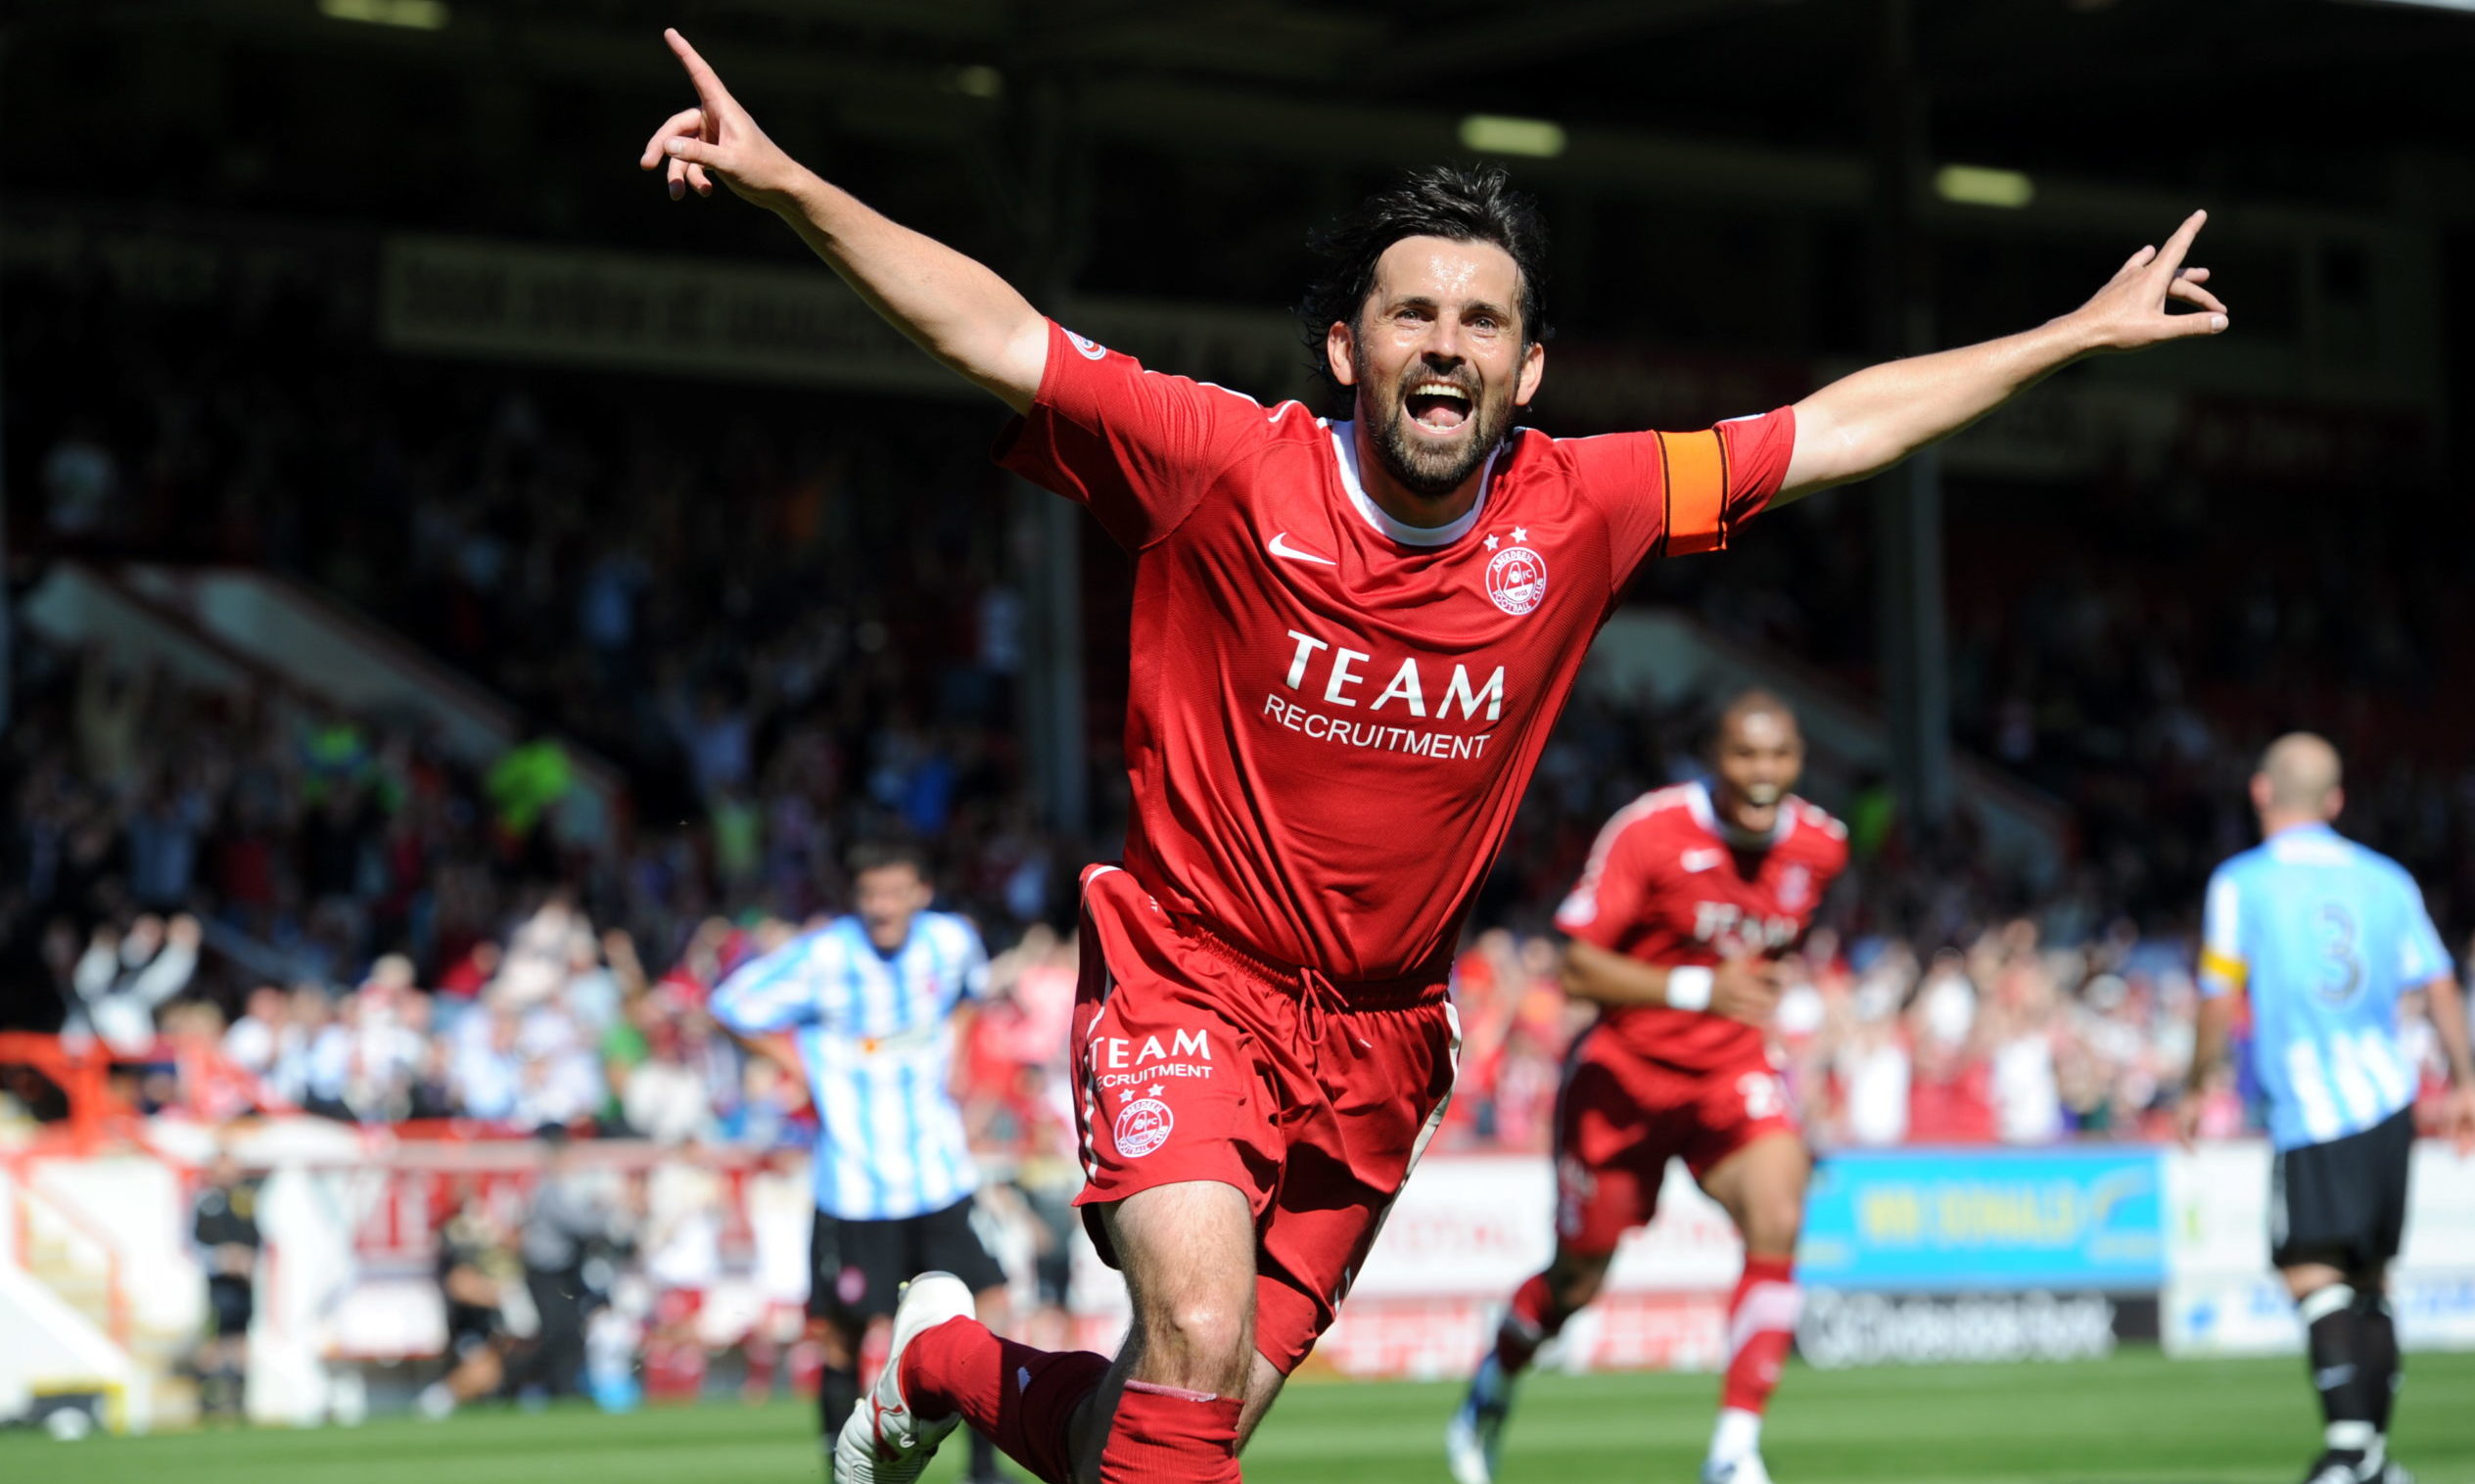 Paul Hartley celebrates his first goal of the afternoon from the penalty spot.